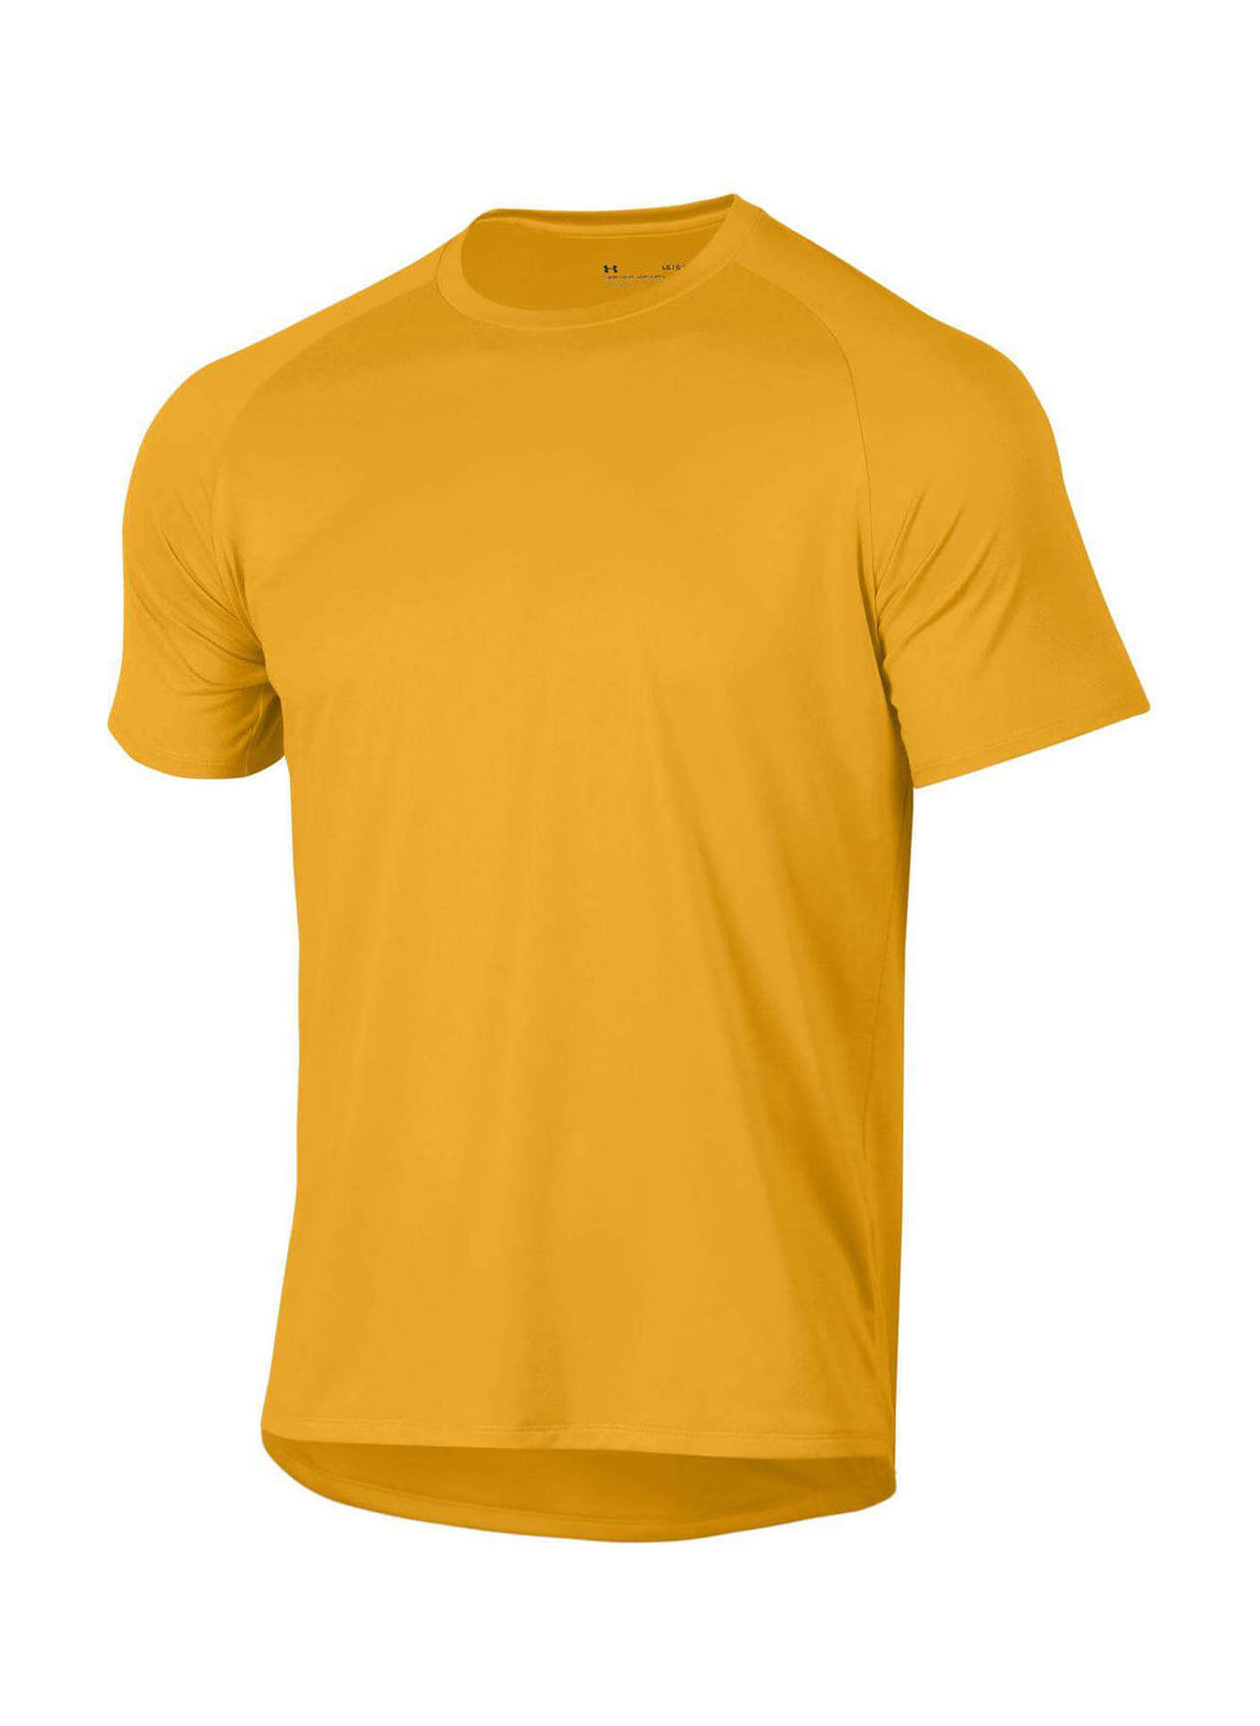 Screen Printed T-shirts  Under Armour Men's Steeltown Gold Performance  Cotton T-Shirt